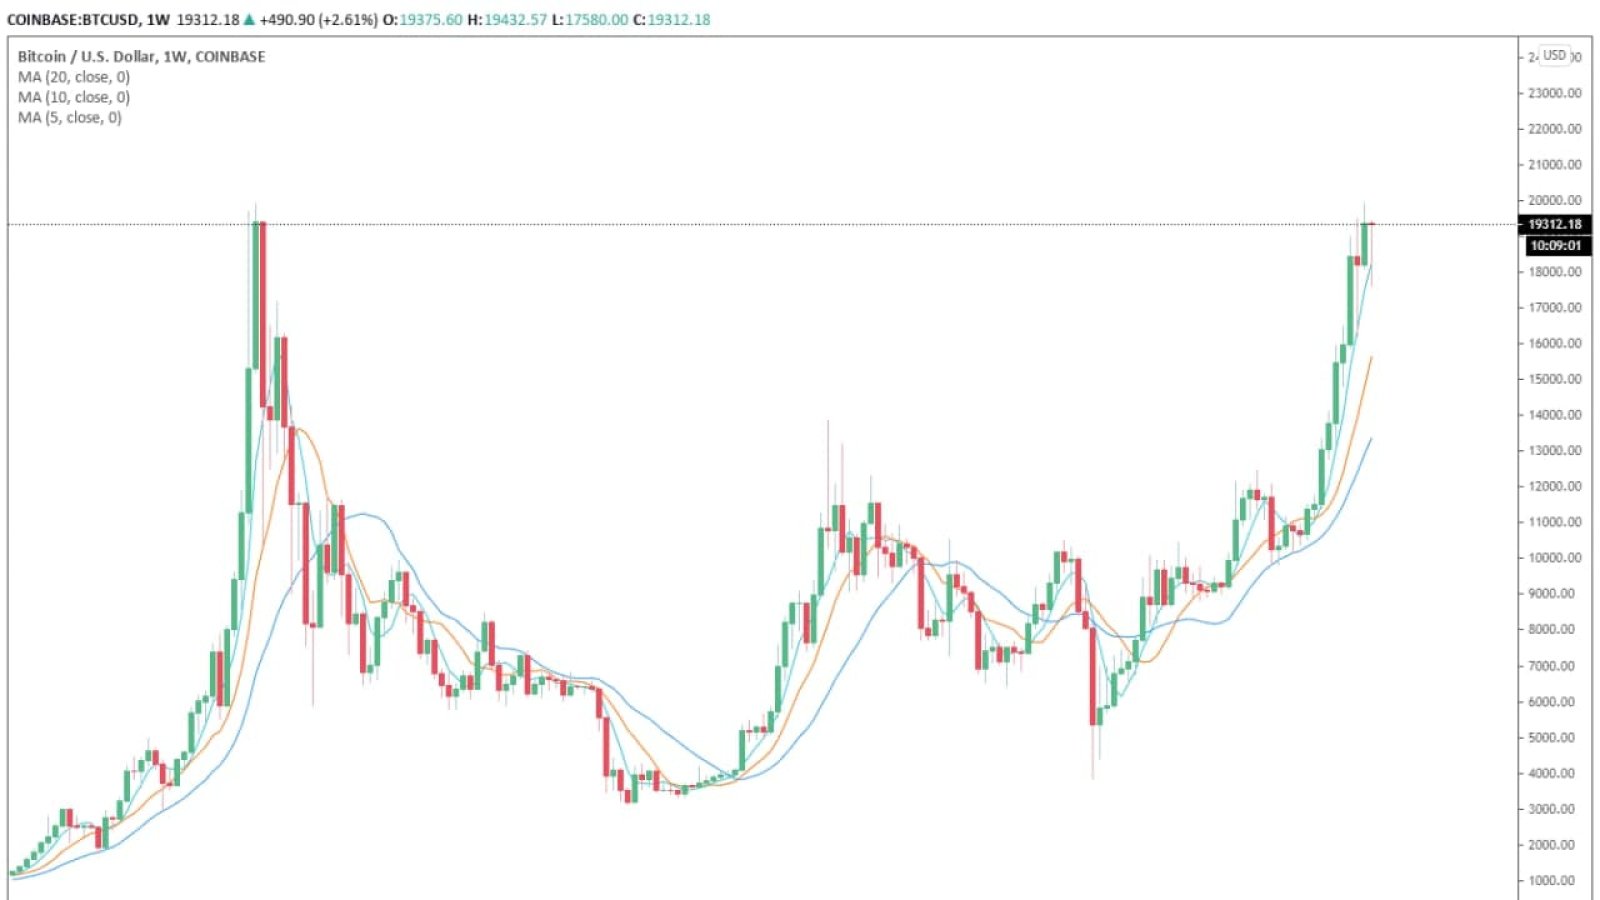 The weekly price chart of Bitcoin